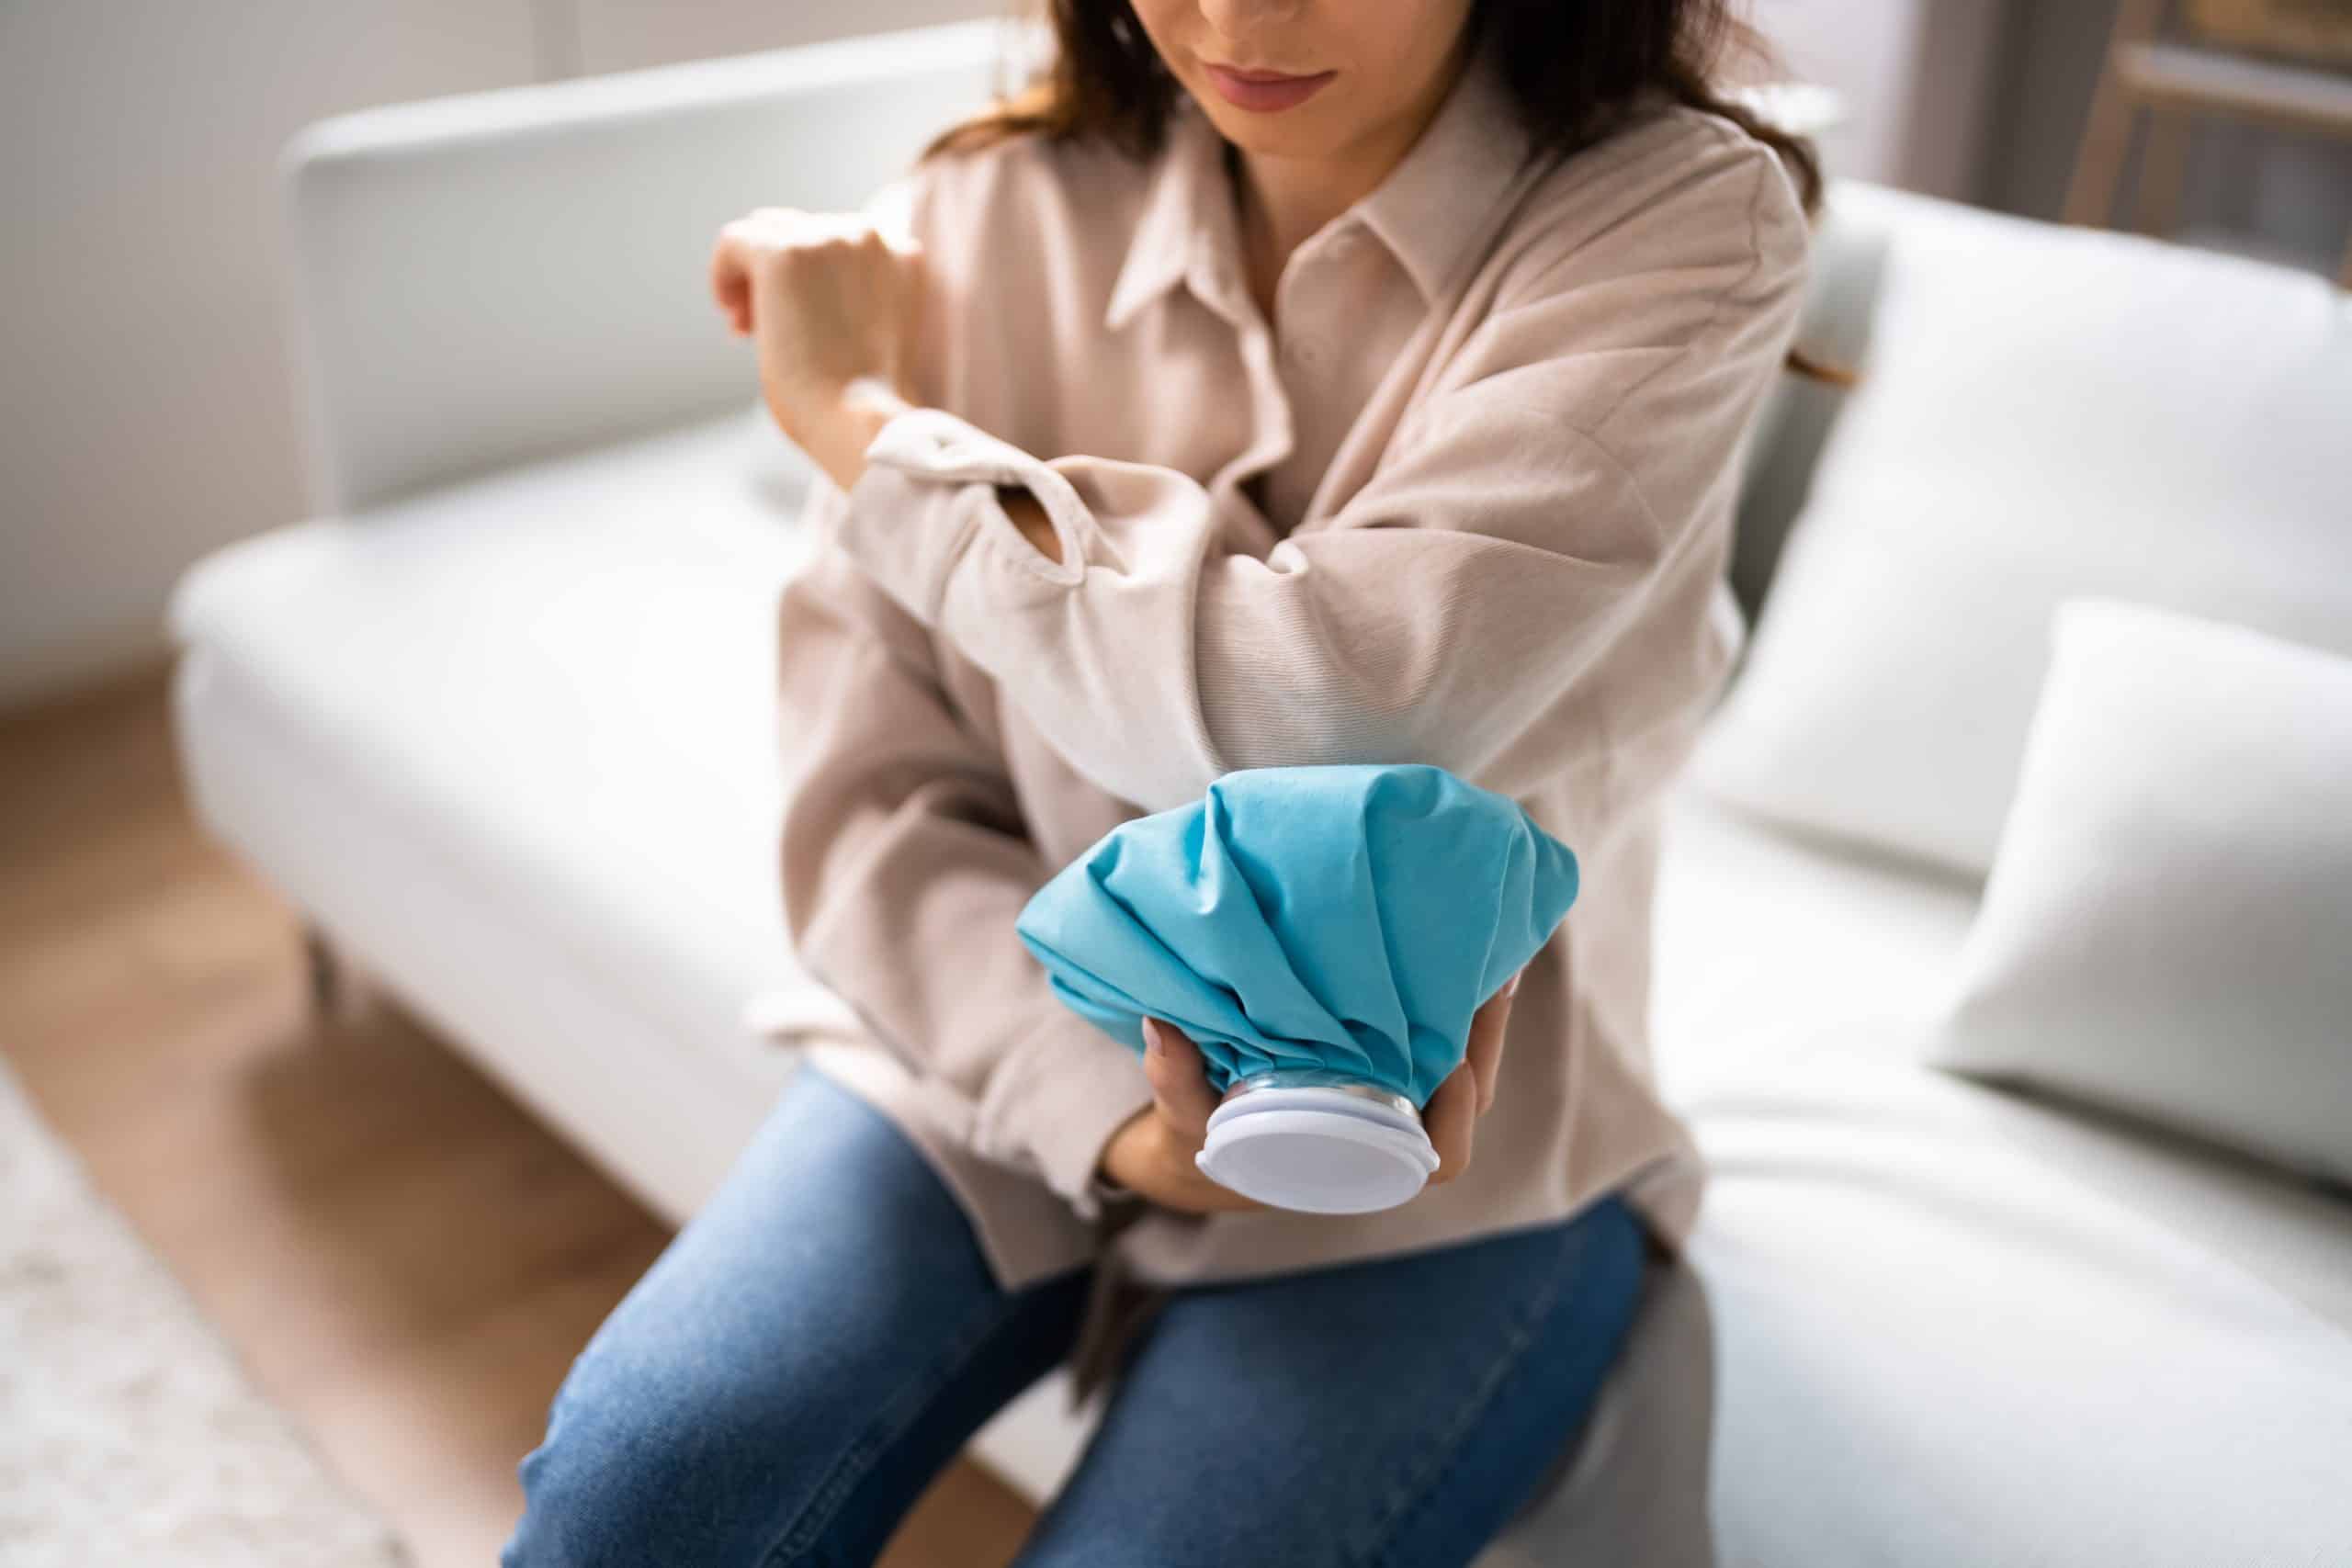 https://dunbarmedical.com/wp-content/uploads/2023/05/Woman-applying-cold-compress-to-her-elbow-scaled.jpg